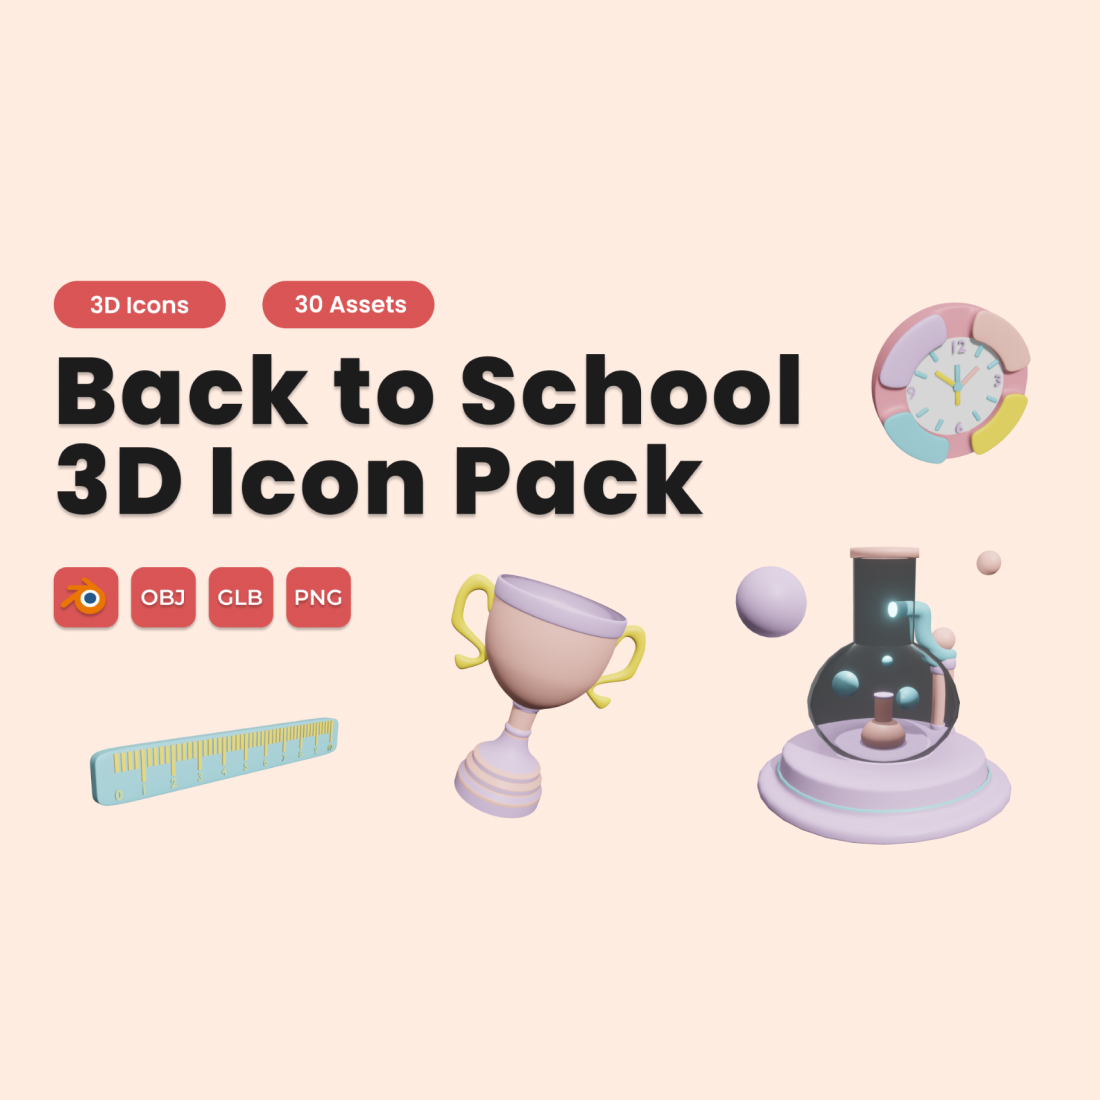 Back to School 3D Icon Pack Vol 1 cover image.